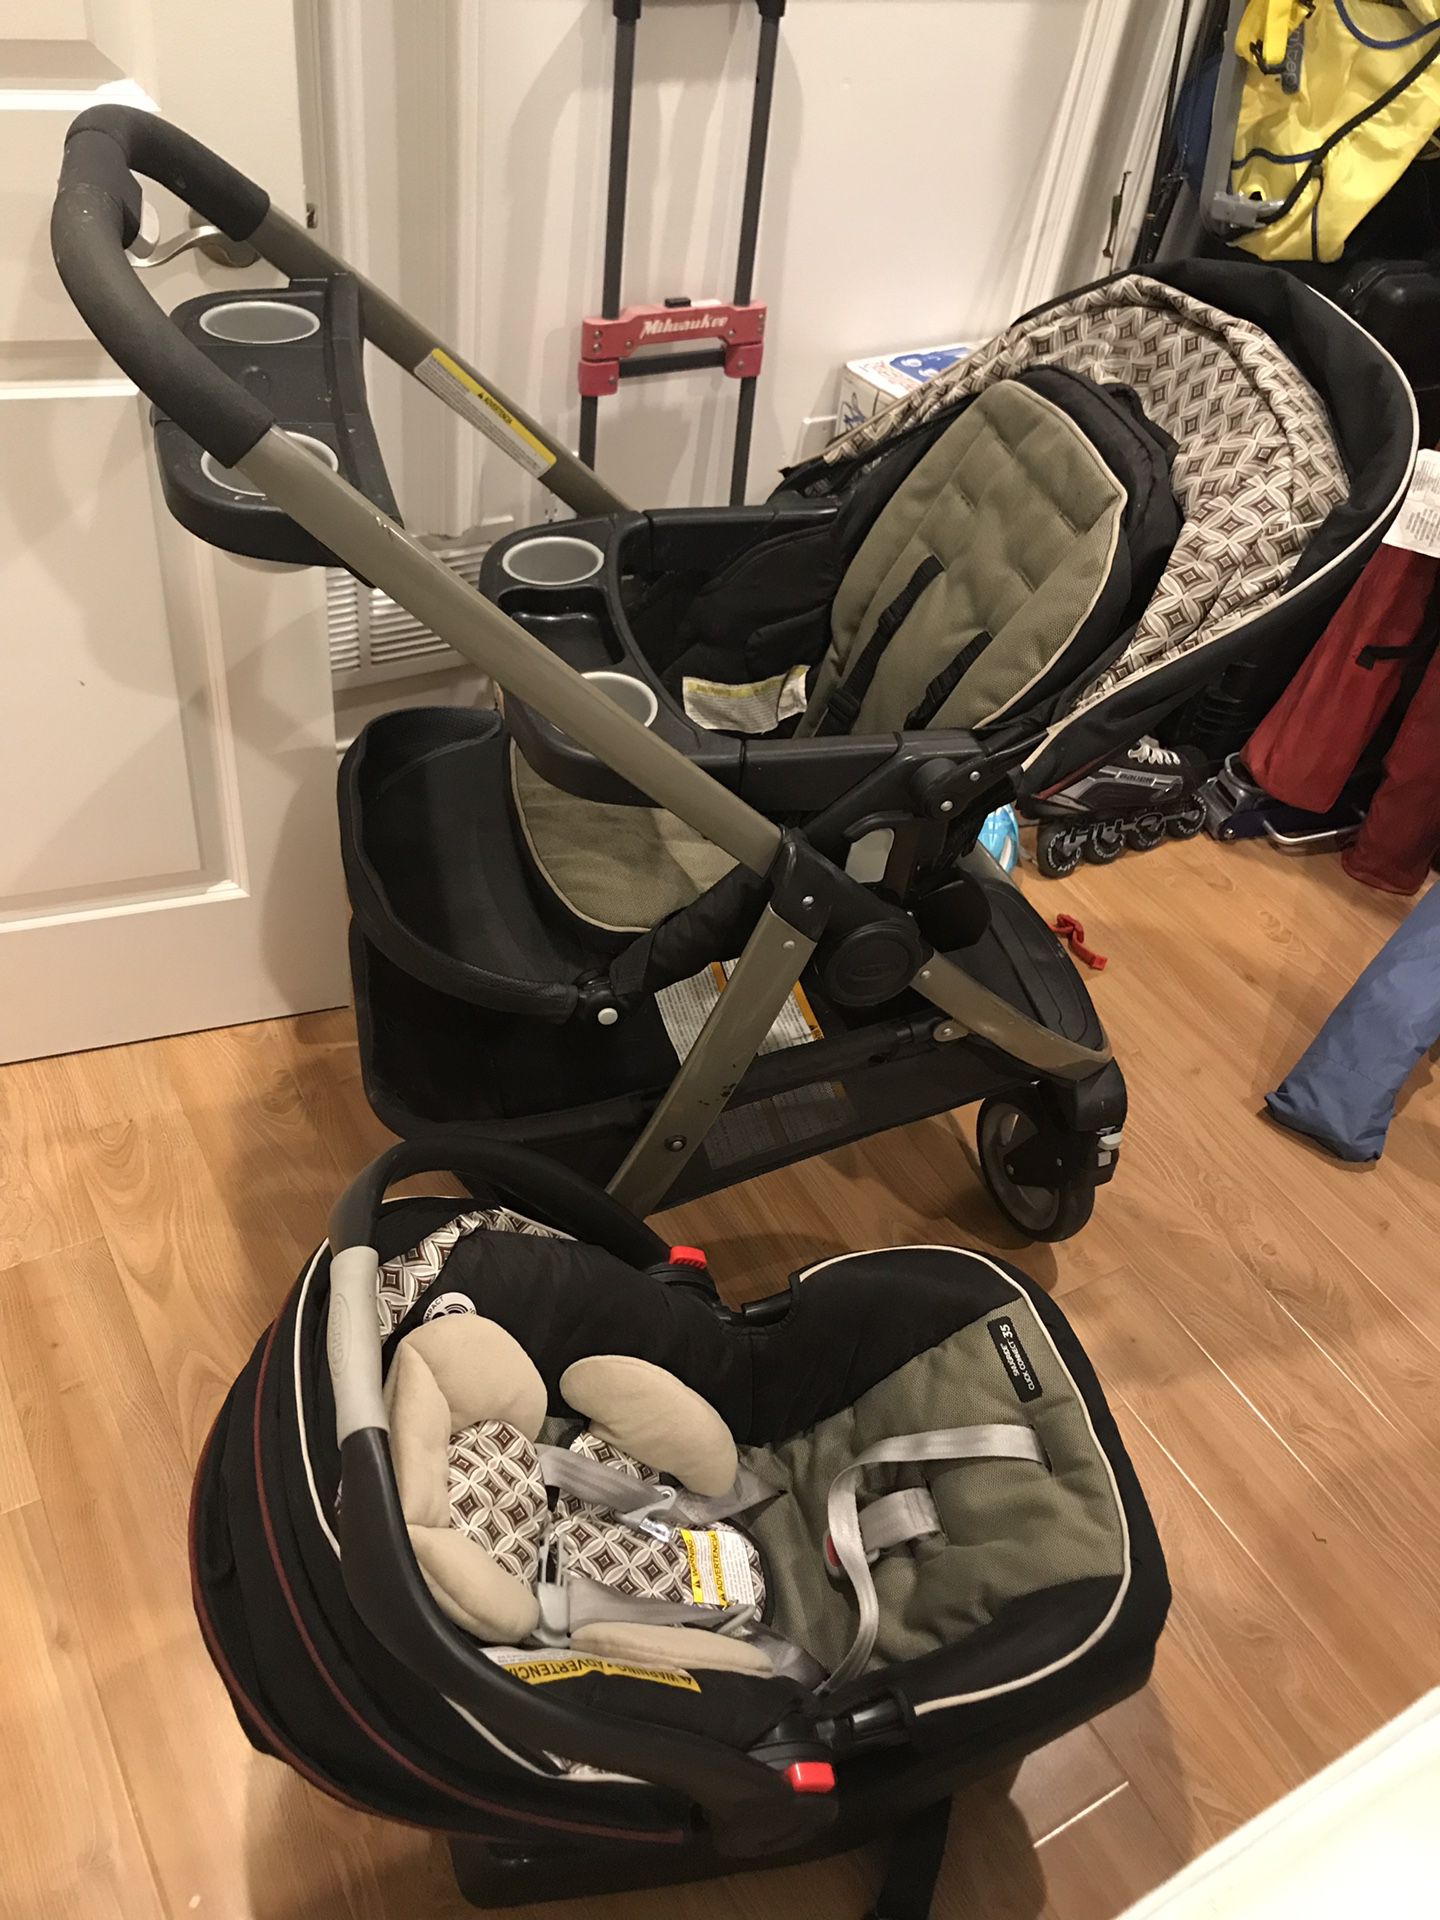 Graco stroller and infant car seat combo with base